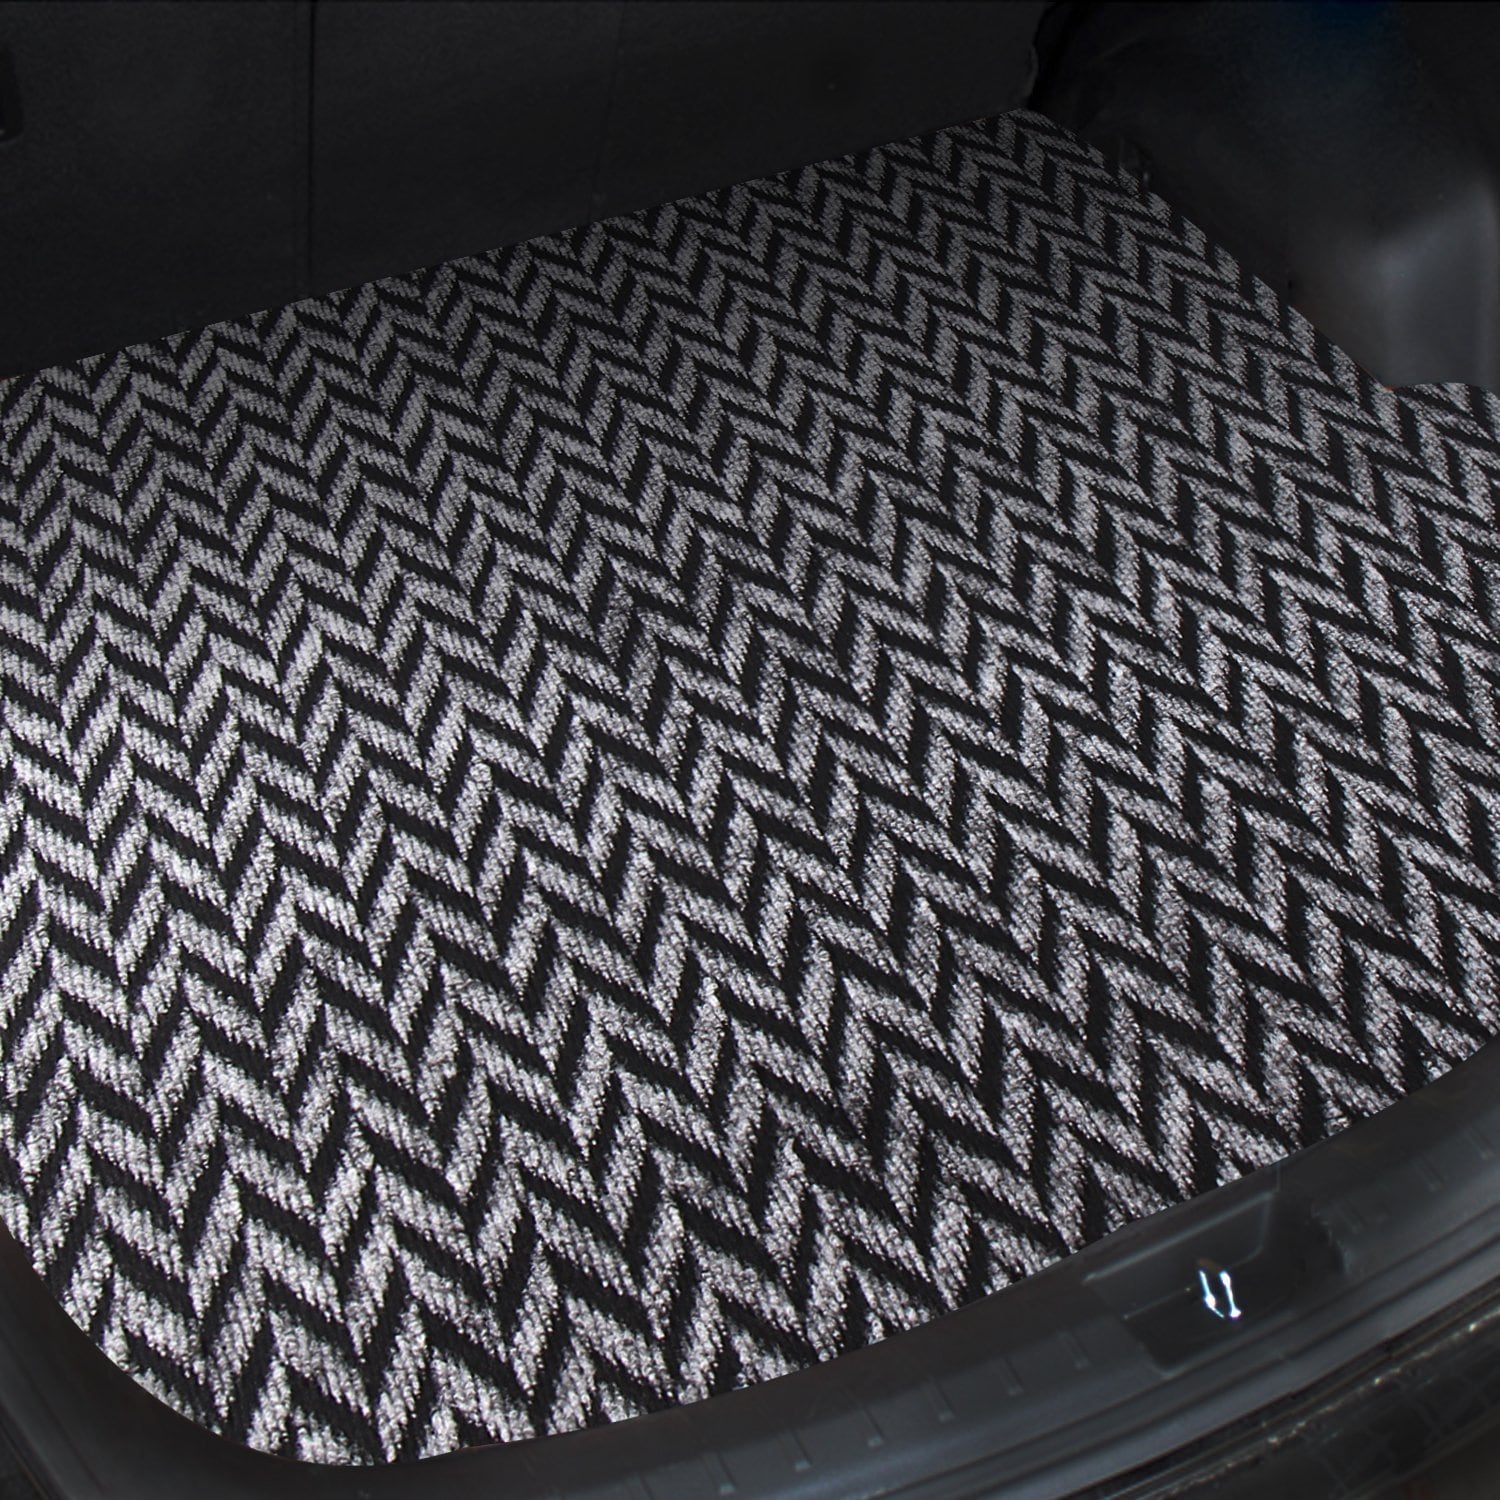 Adeco Trimmable Custom fit Car Vehicle Floor Mat